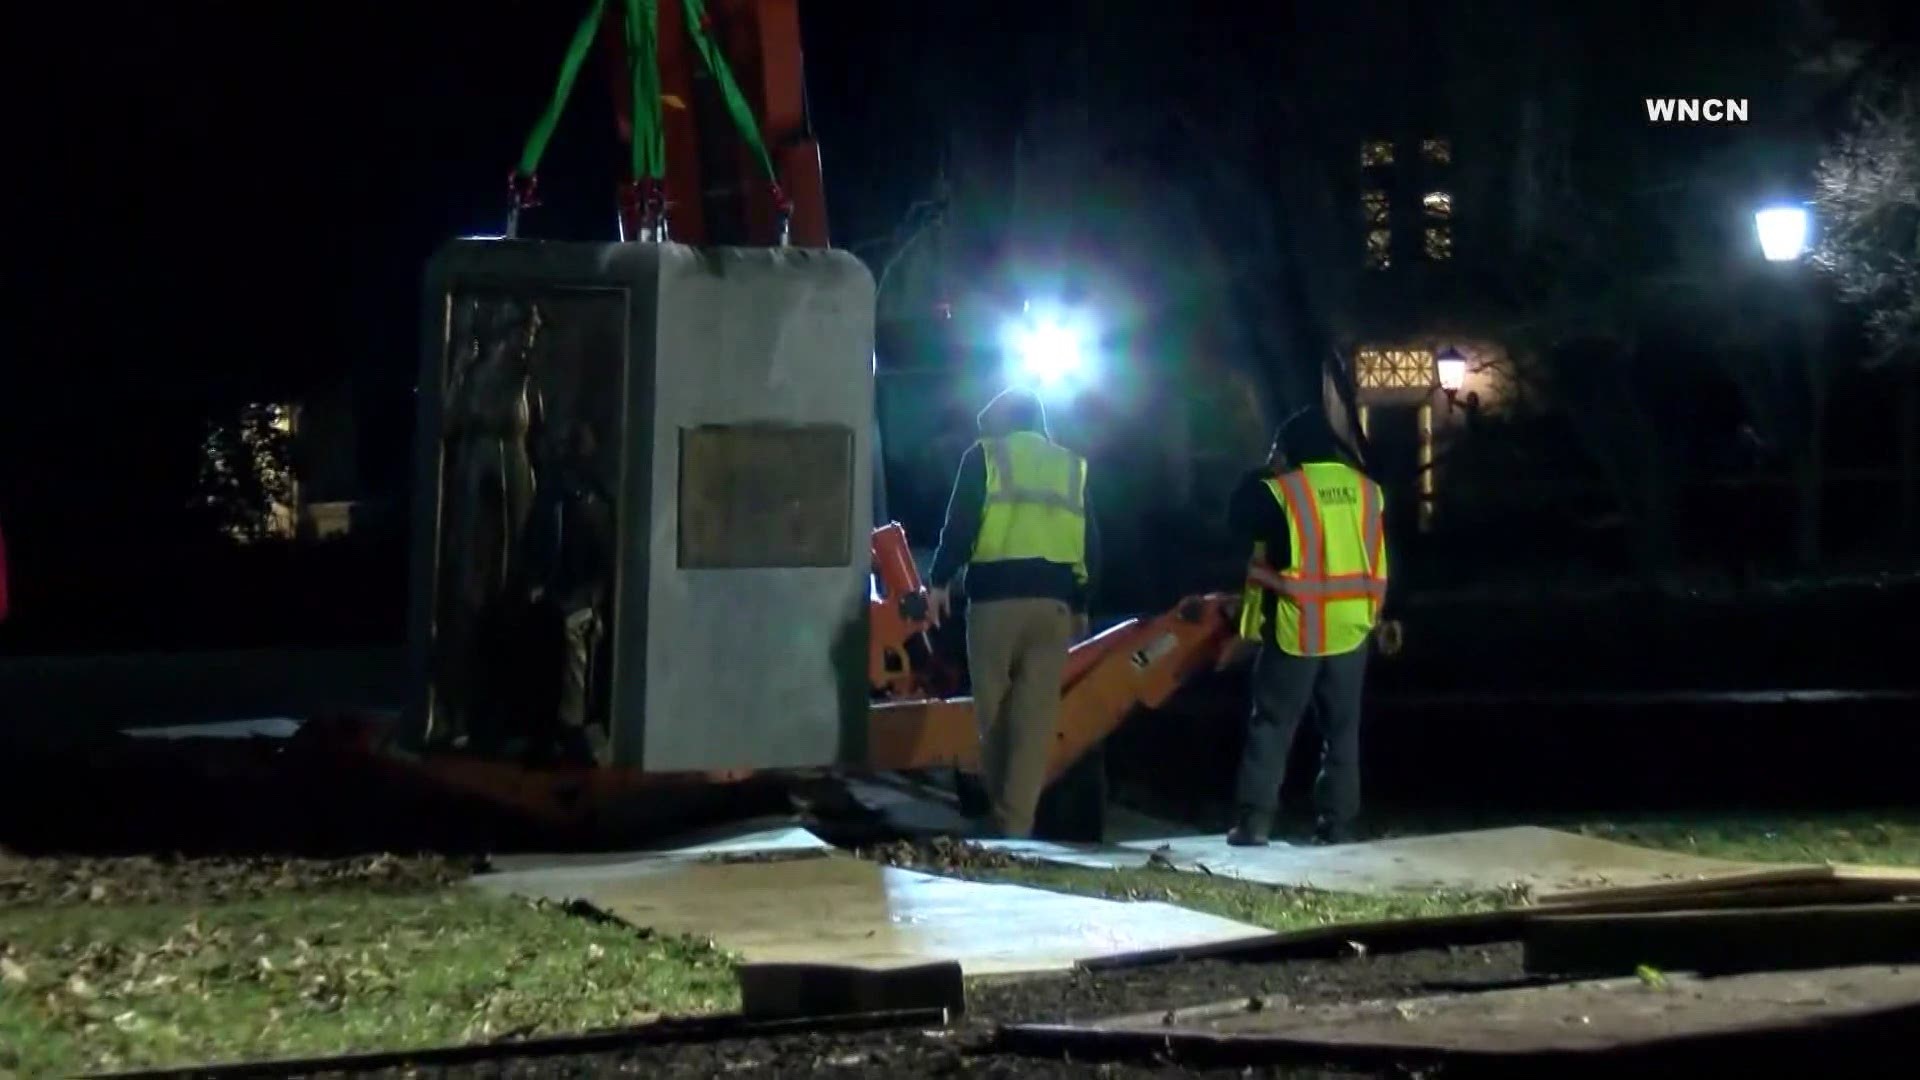 Just hours after UNC Chancellor Carol Folt announced she was stepping down, work crews set up around Silent Sam's former location on campus.